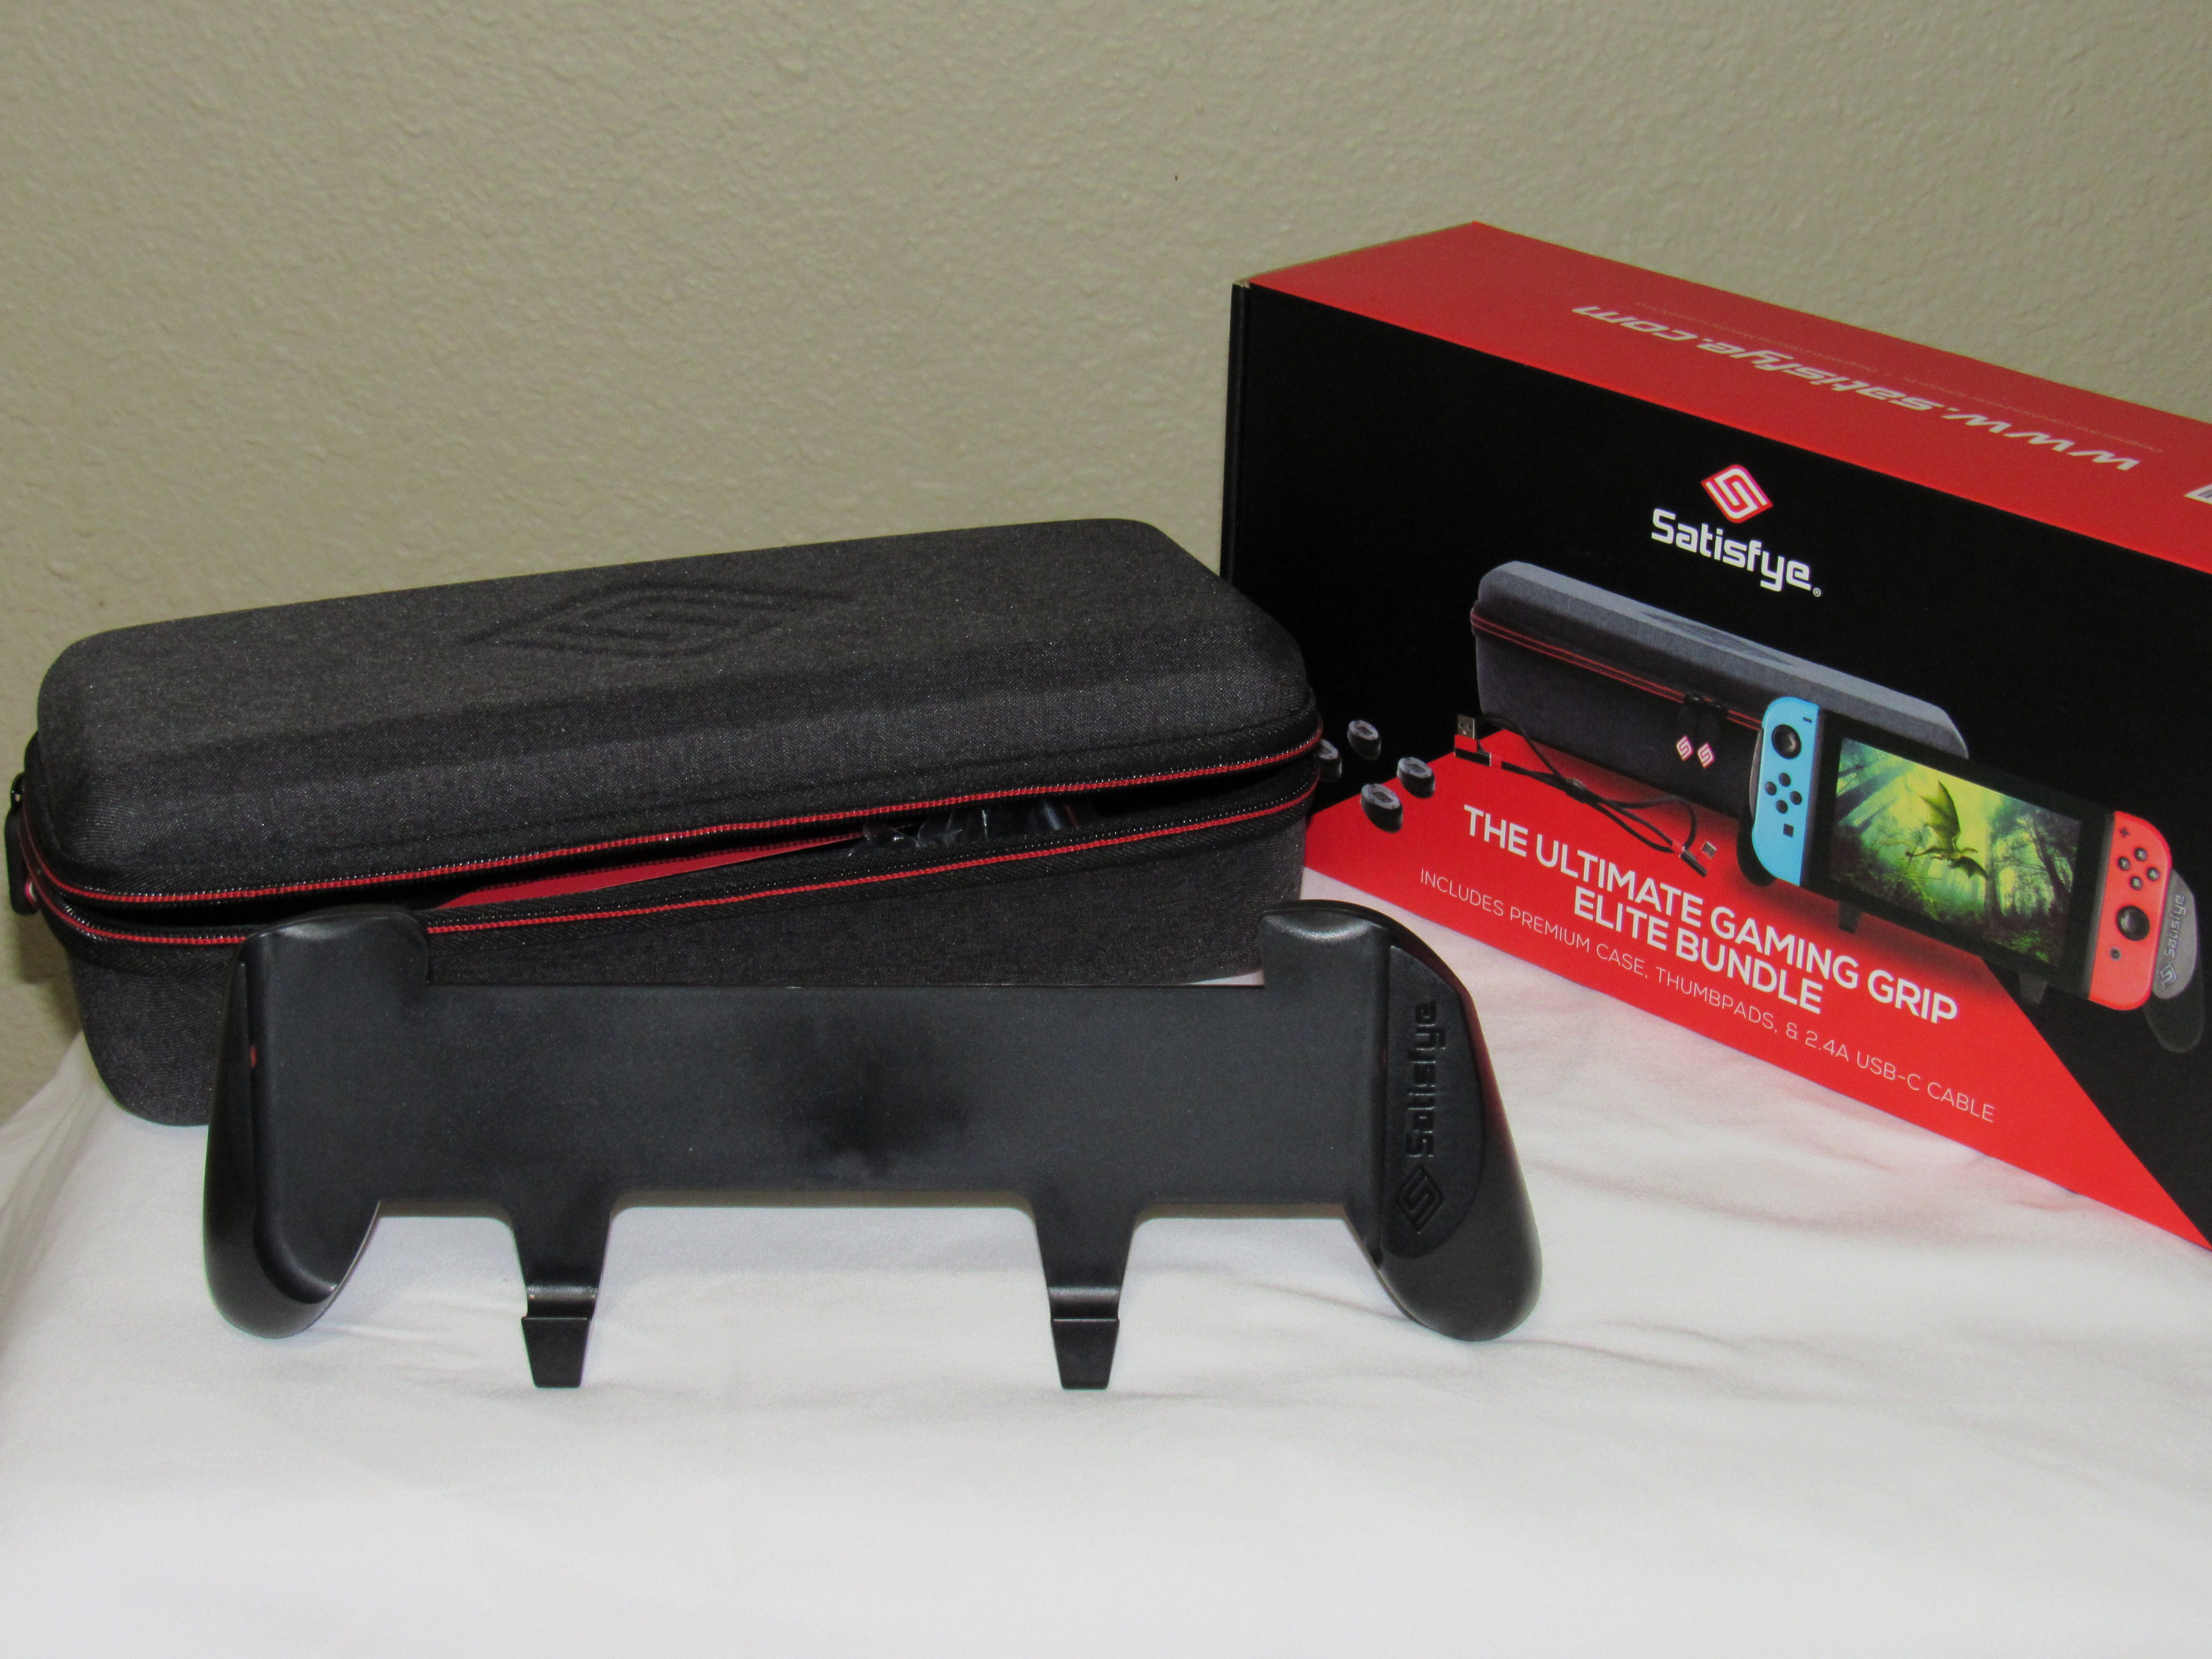 Review: Satisfye’s Pro Gaming Grip And Elite Gaming Case For Nintendo Switch